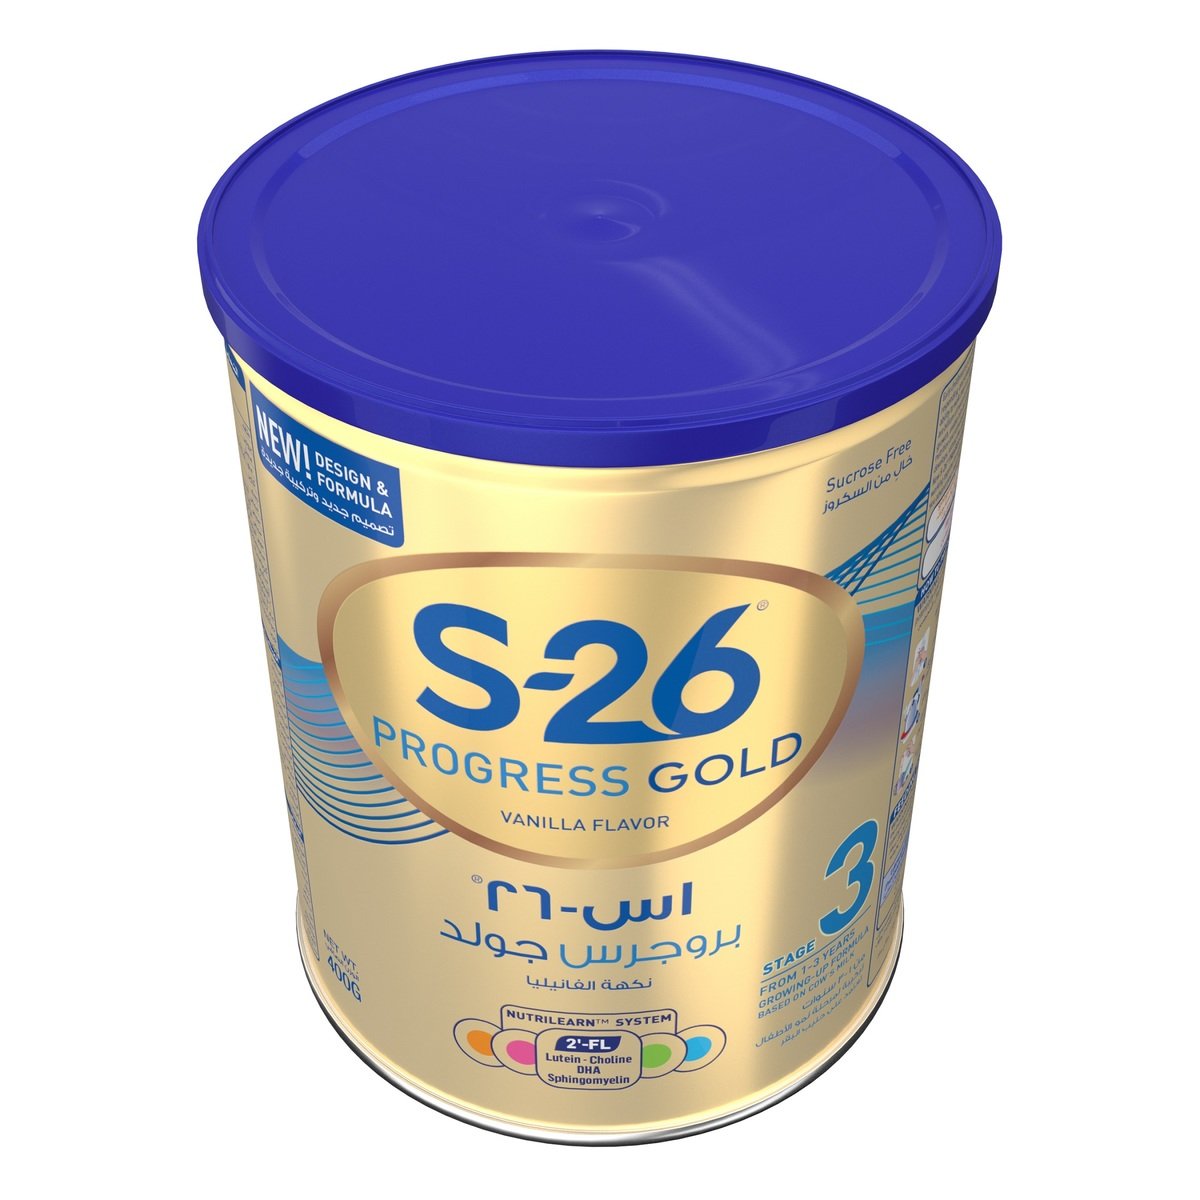 Nestle S26 Progress Gold Stage 3 Growing Up Formula From 1-3 Years 400 g